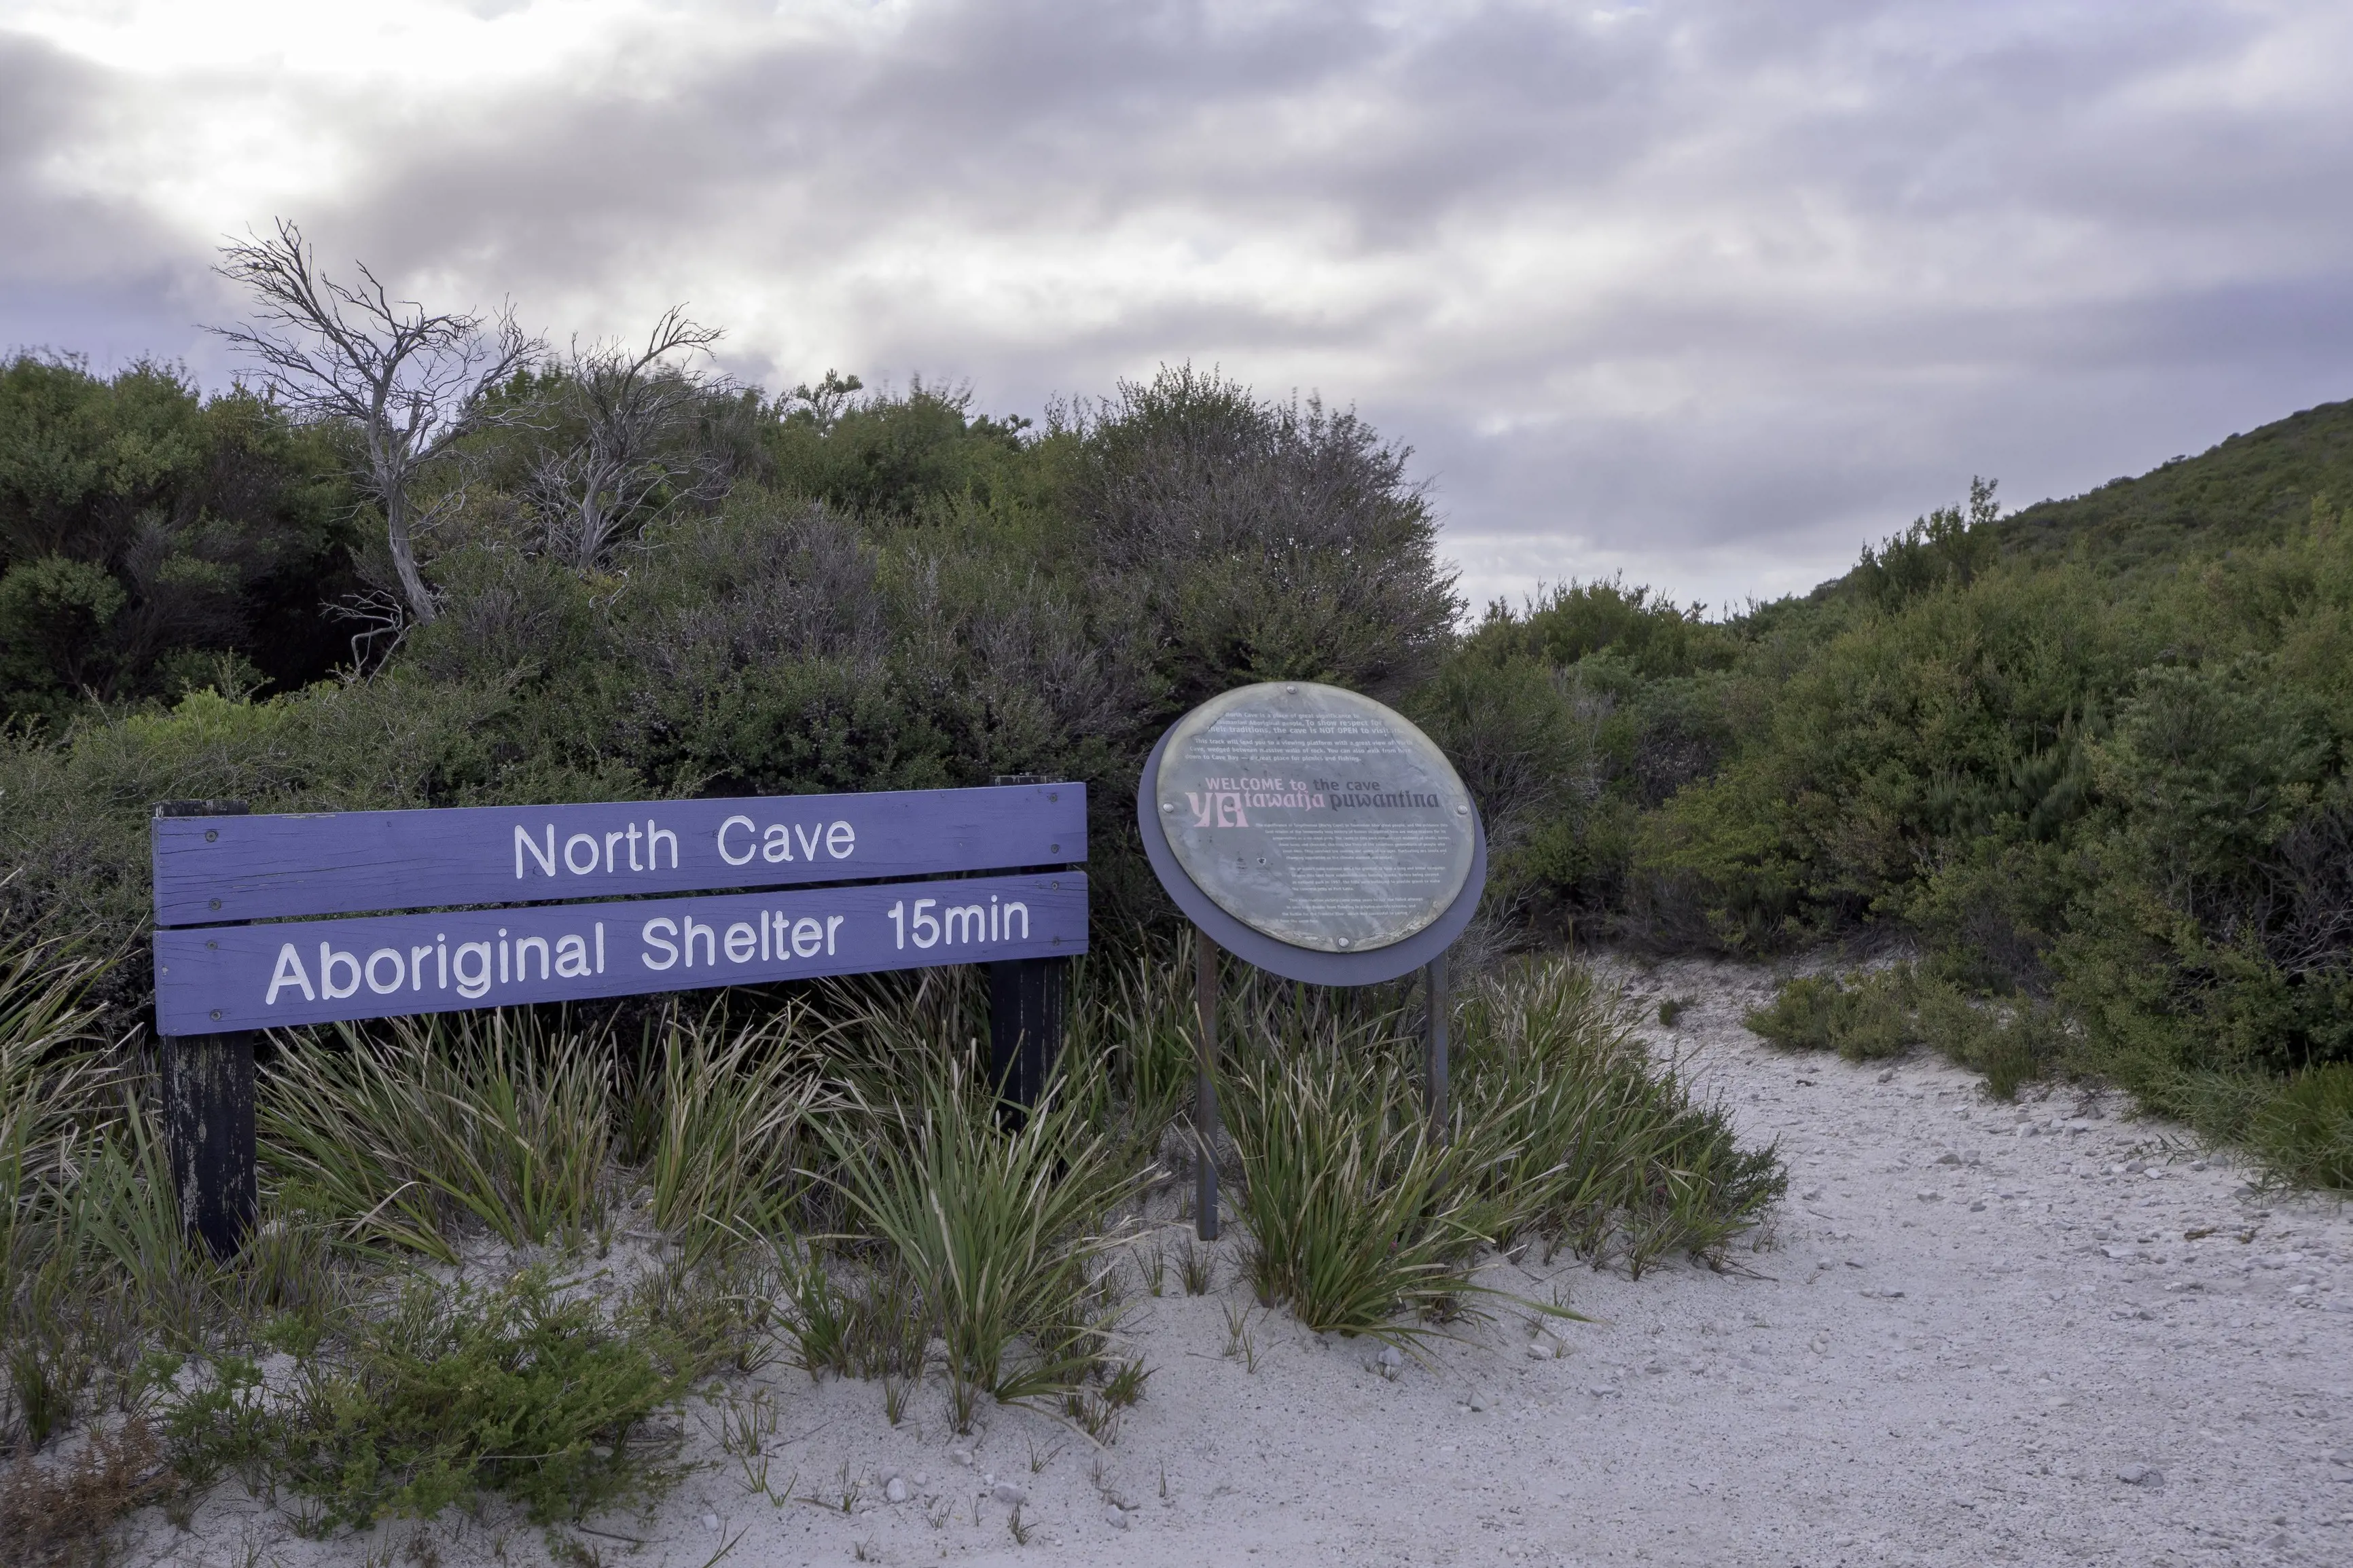 Image of the North Cave sign on the Rocky Cape National Park.